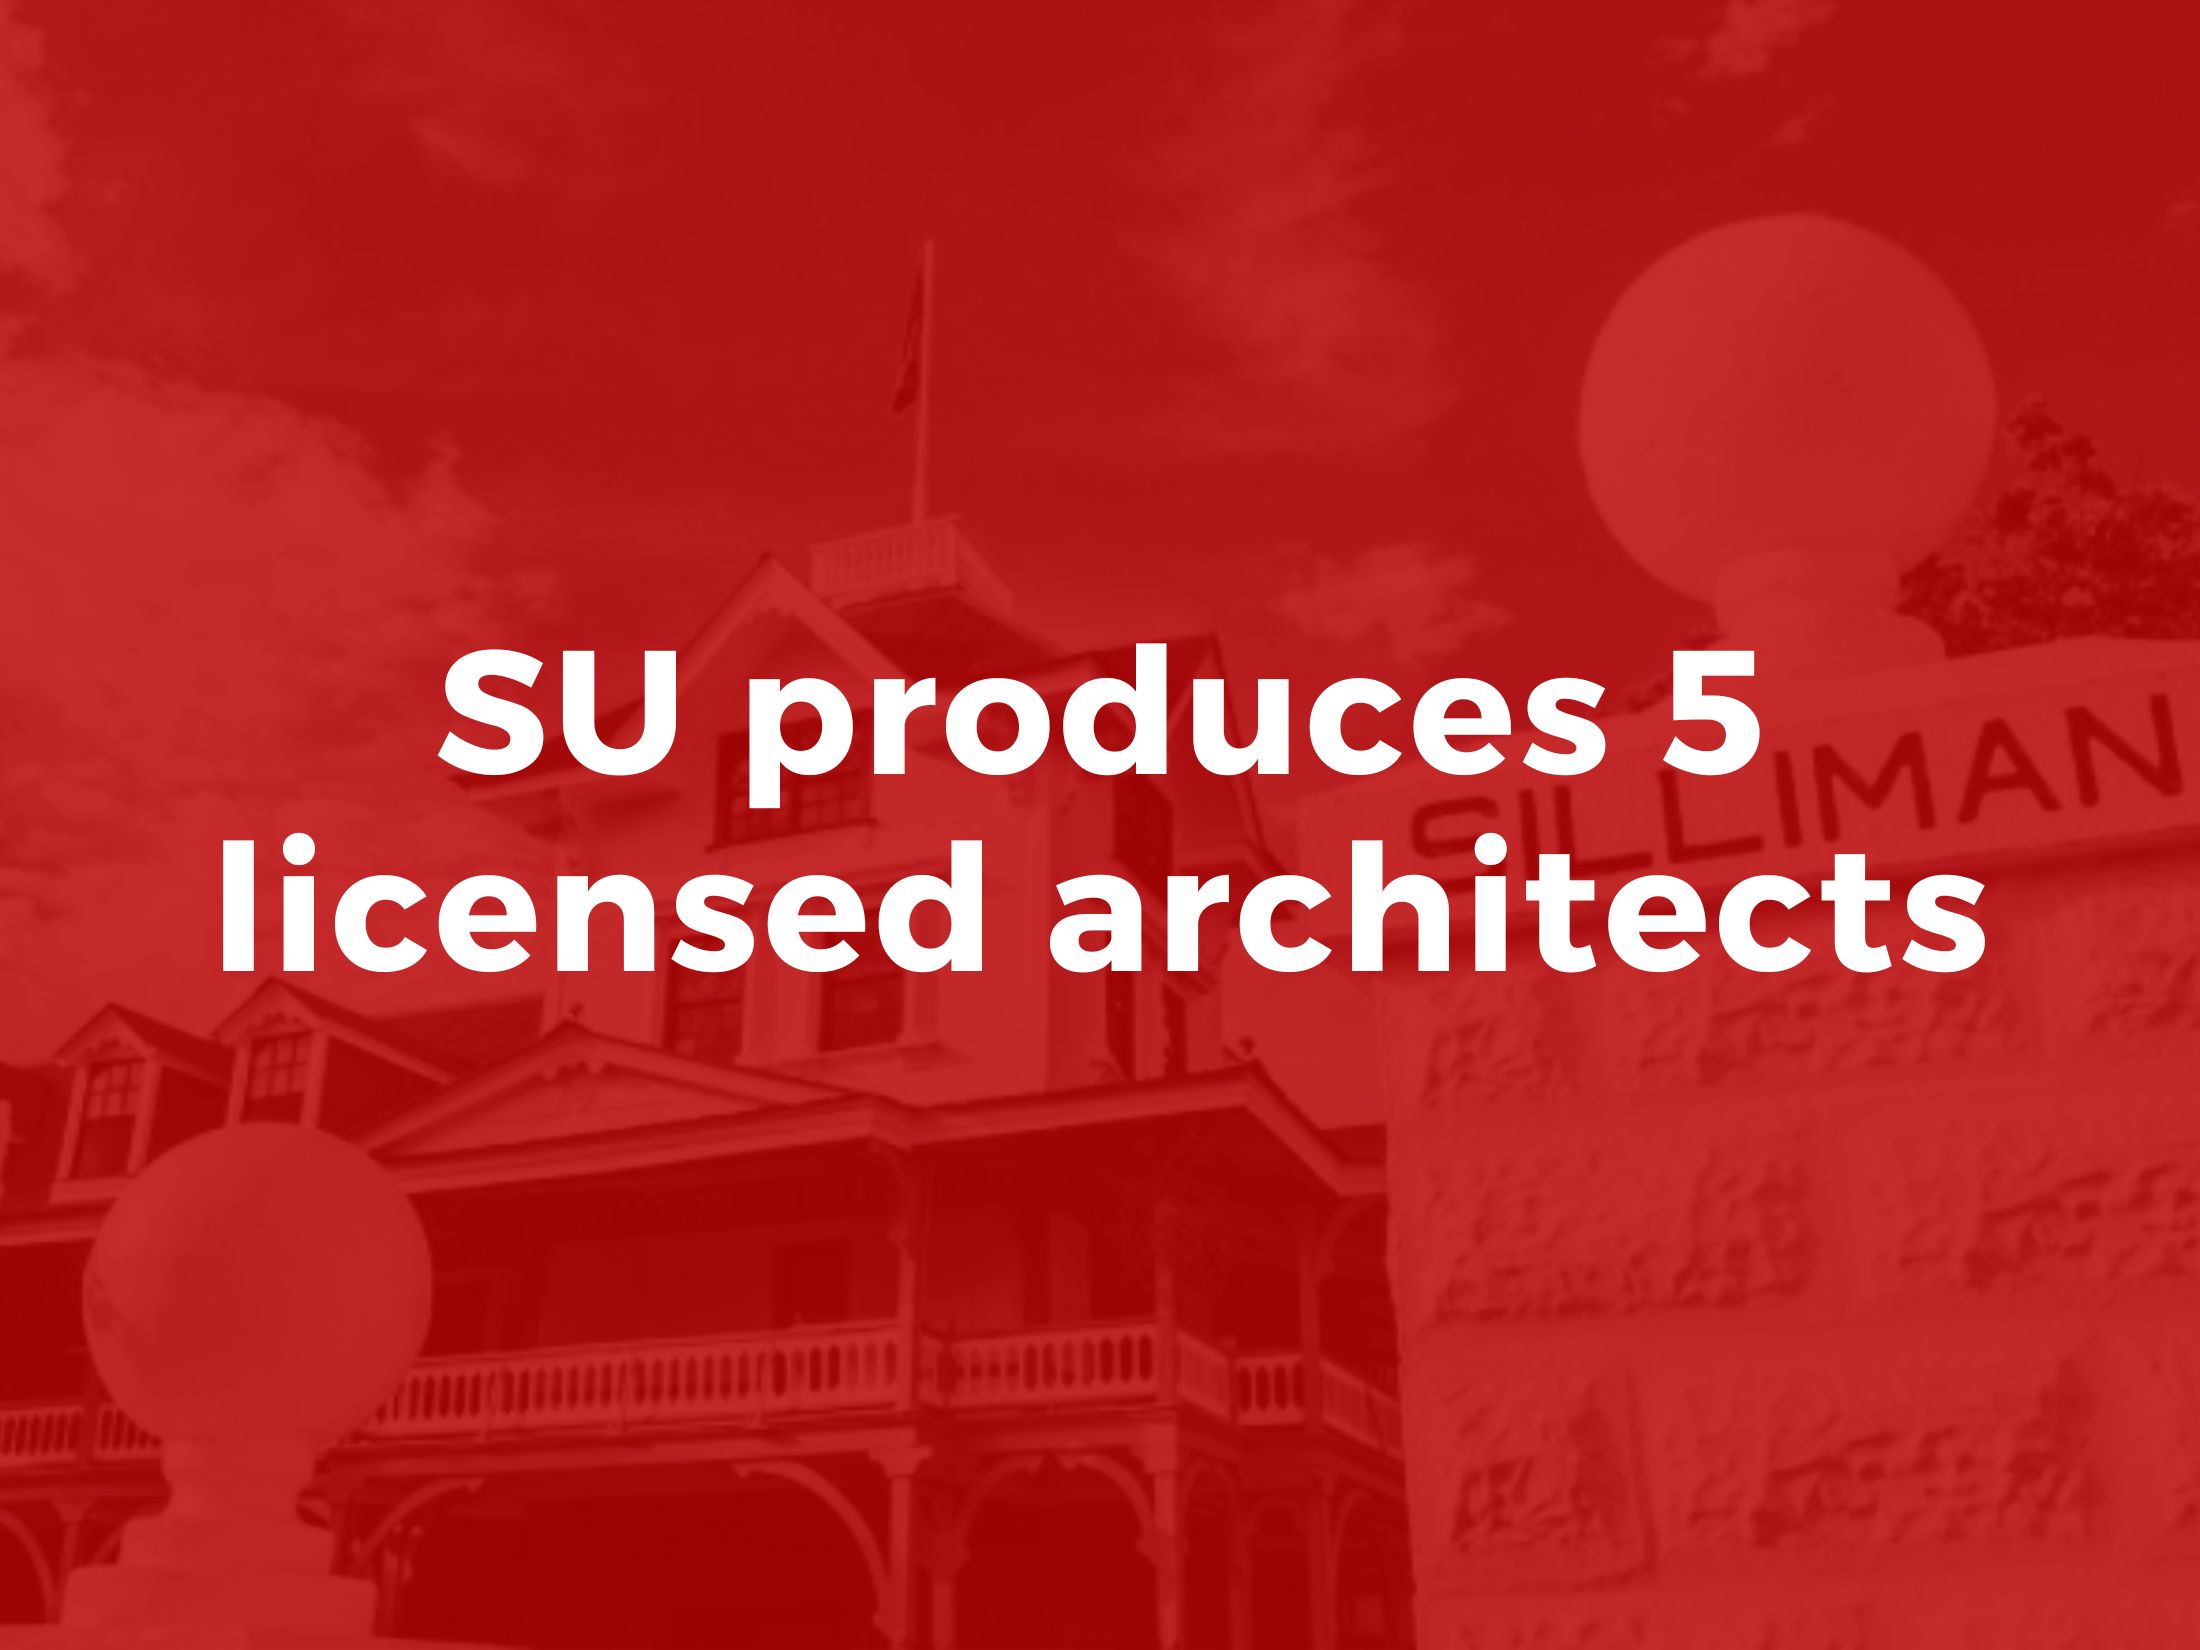 SU produces 5 licensed architects